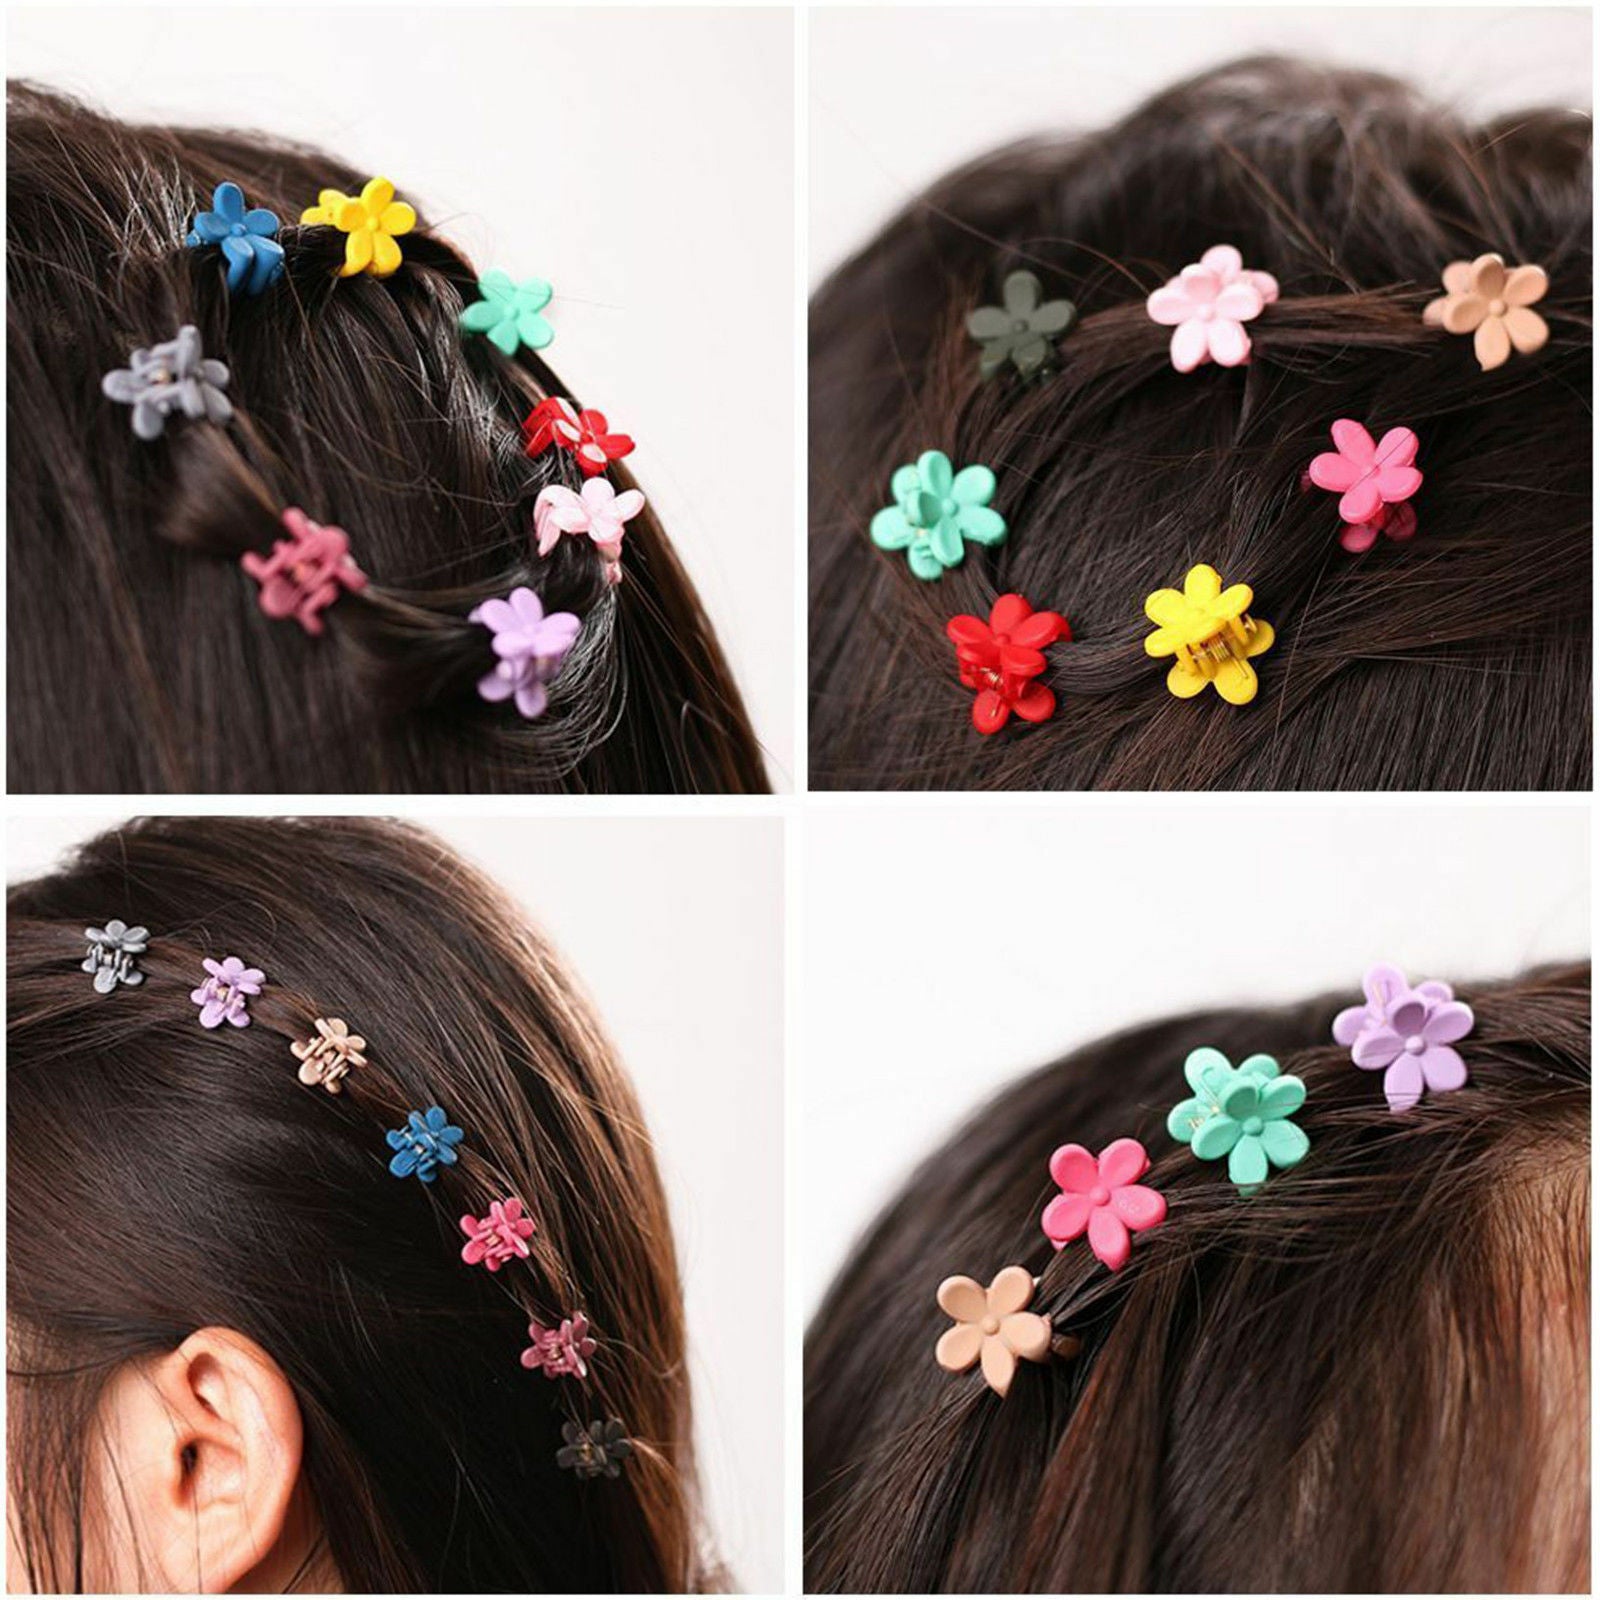 30pcs Girls Kids Mini Small Flower Hair Claws Clips Clamps Hair Pin Accessories